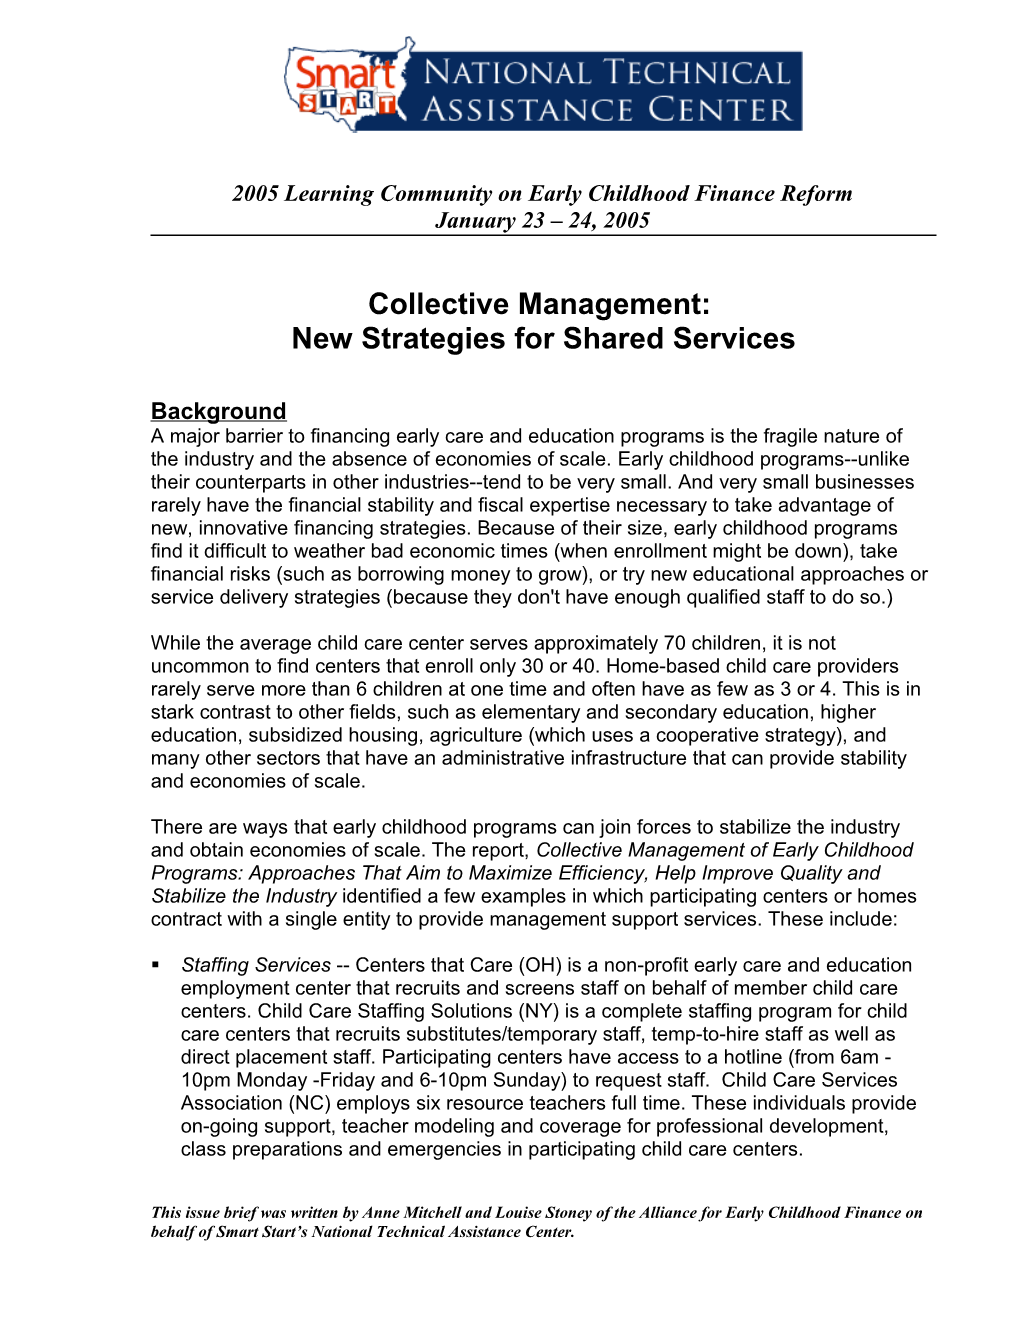 2004 Learning Community on Early Care & Education Finance Reform